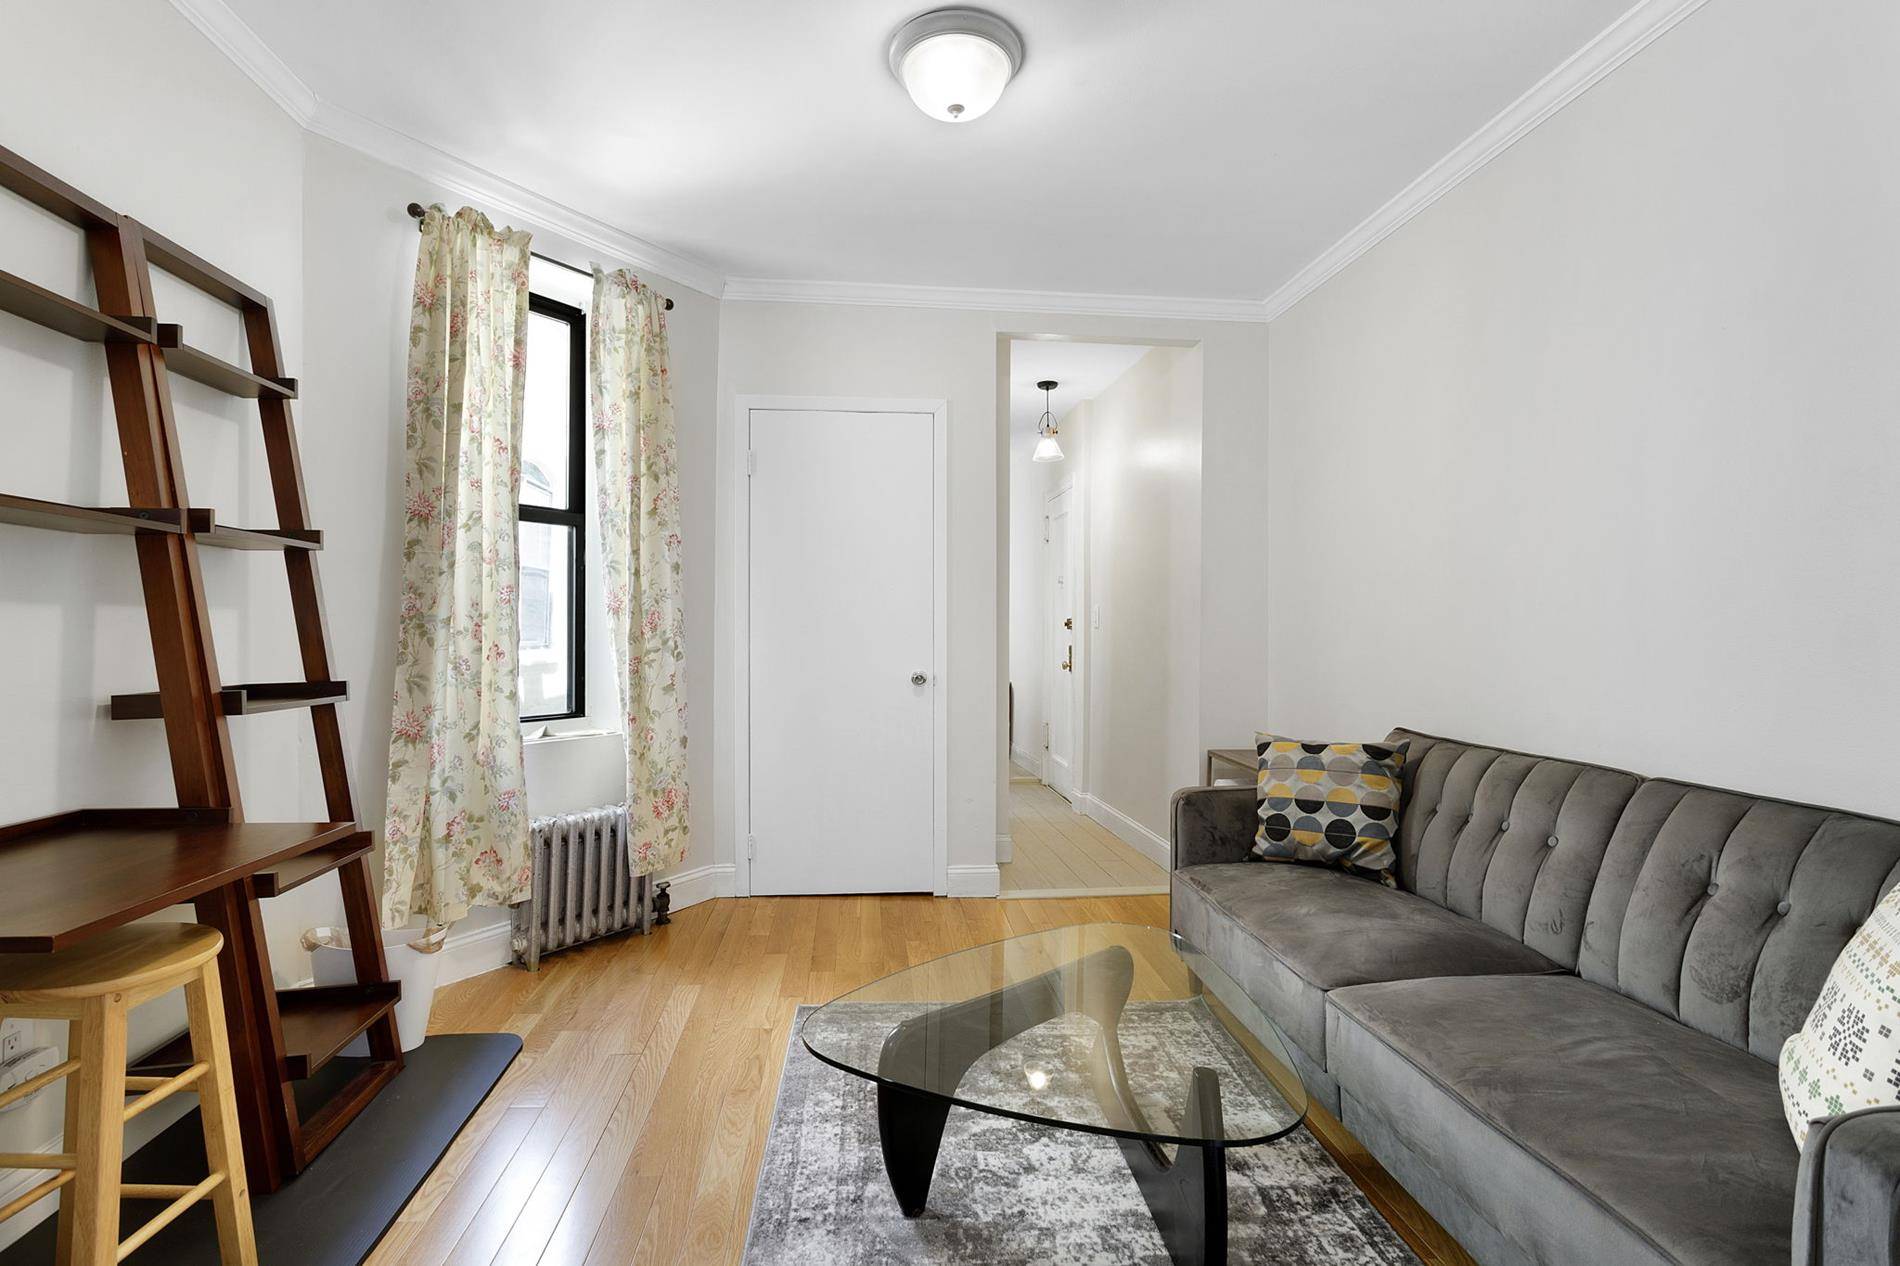 Don't miss this pristine newly renovated 1 bedroom quietly nestled in the heart of everything.